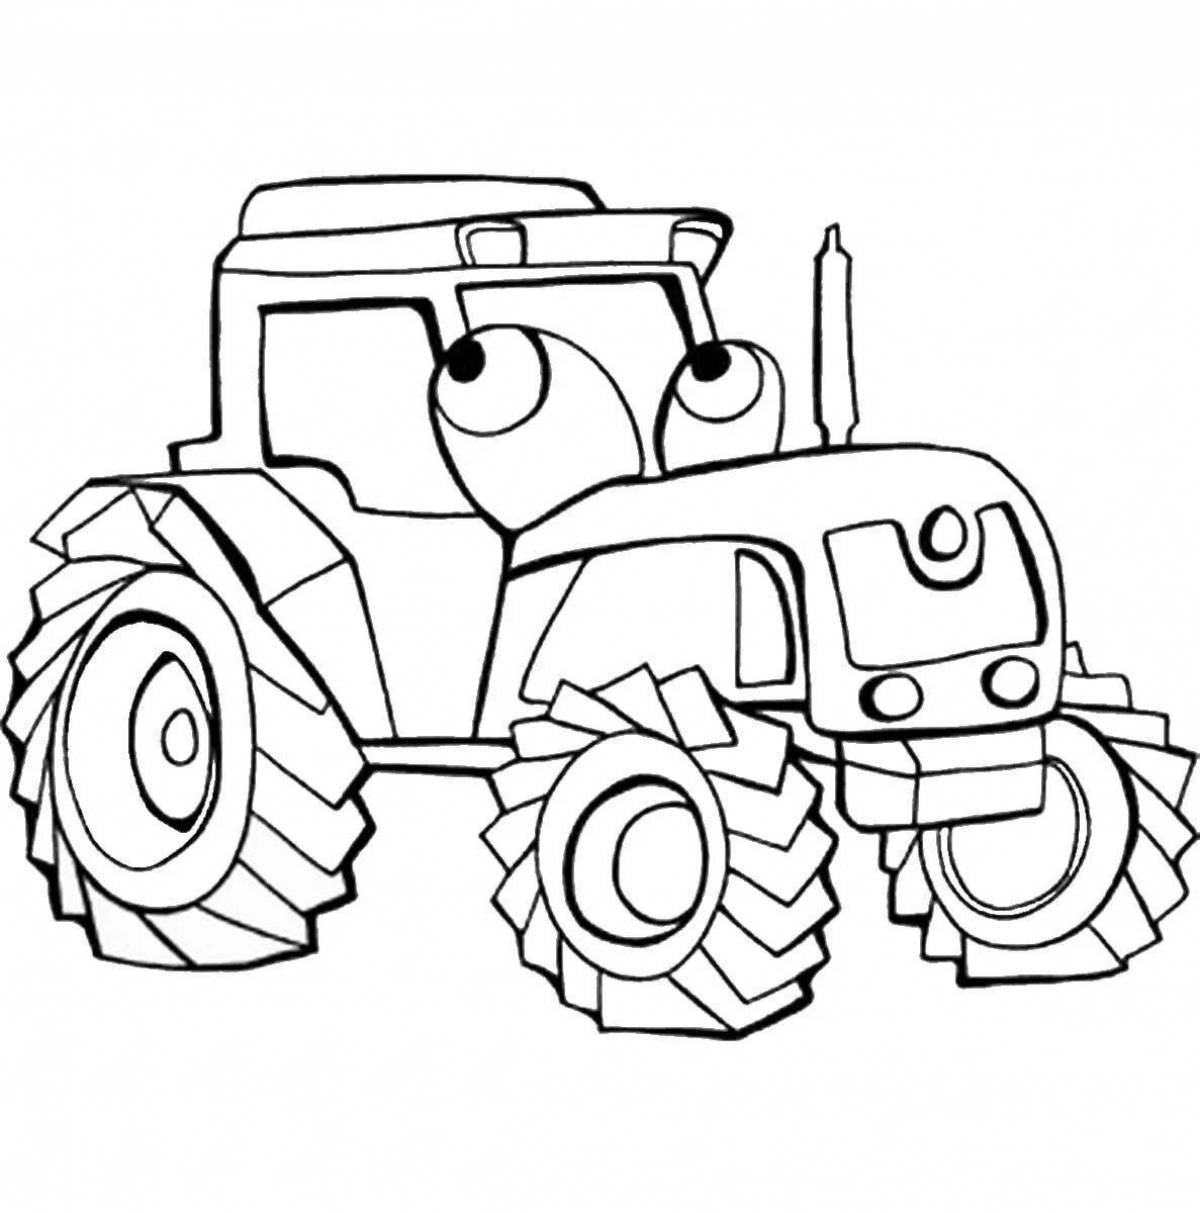 Interesting tractor coloring page